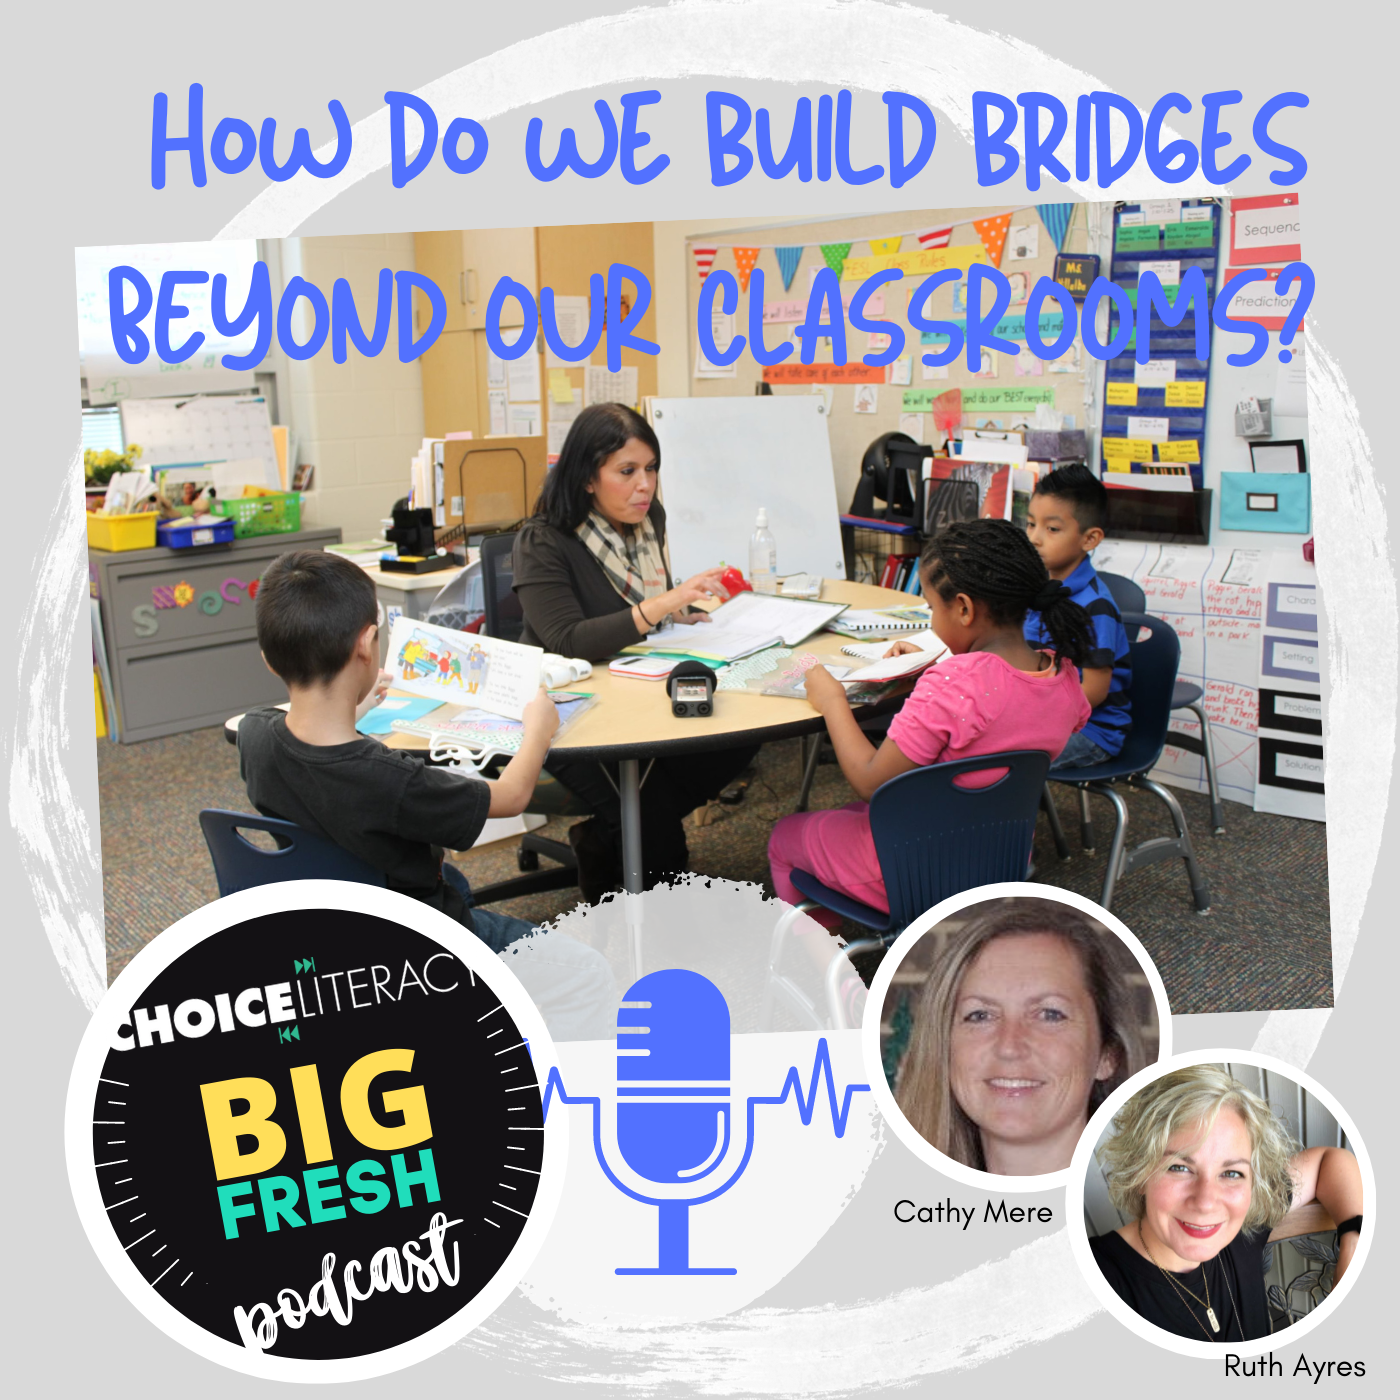 Building Connections Beyond the Classroom